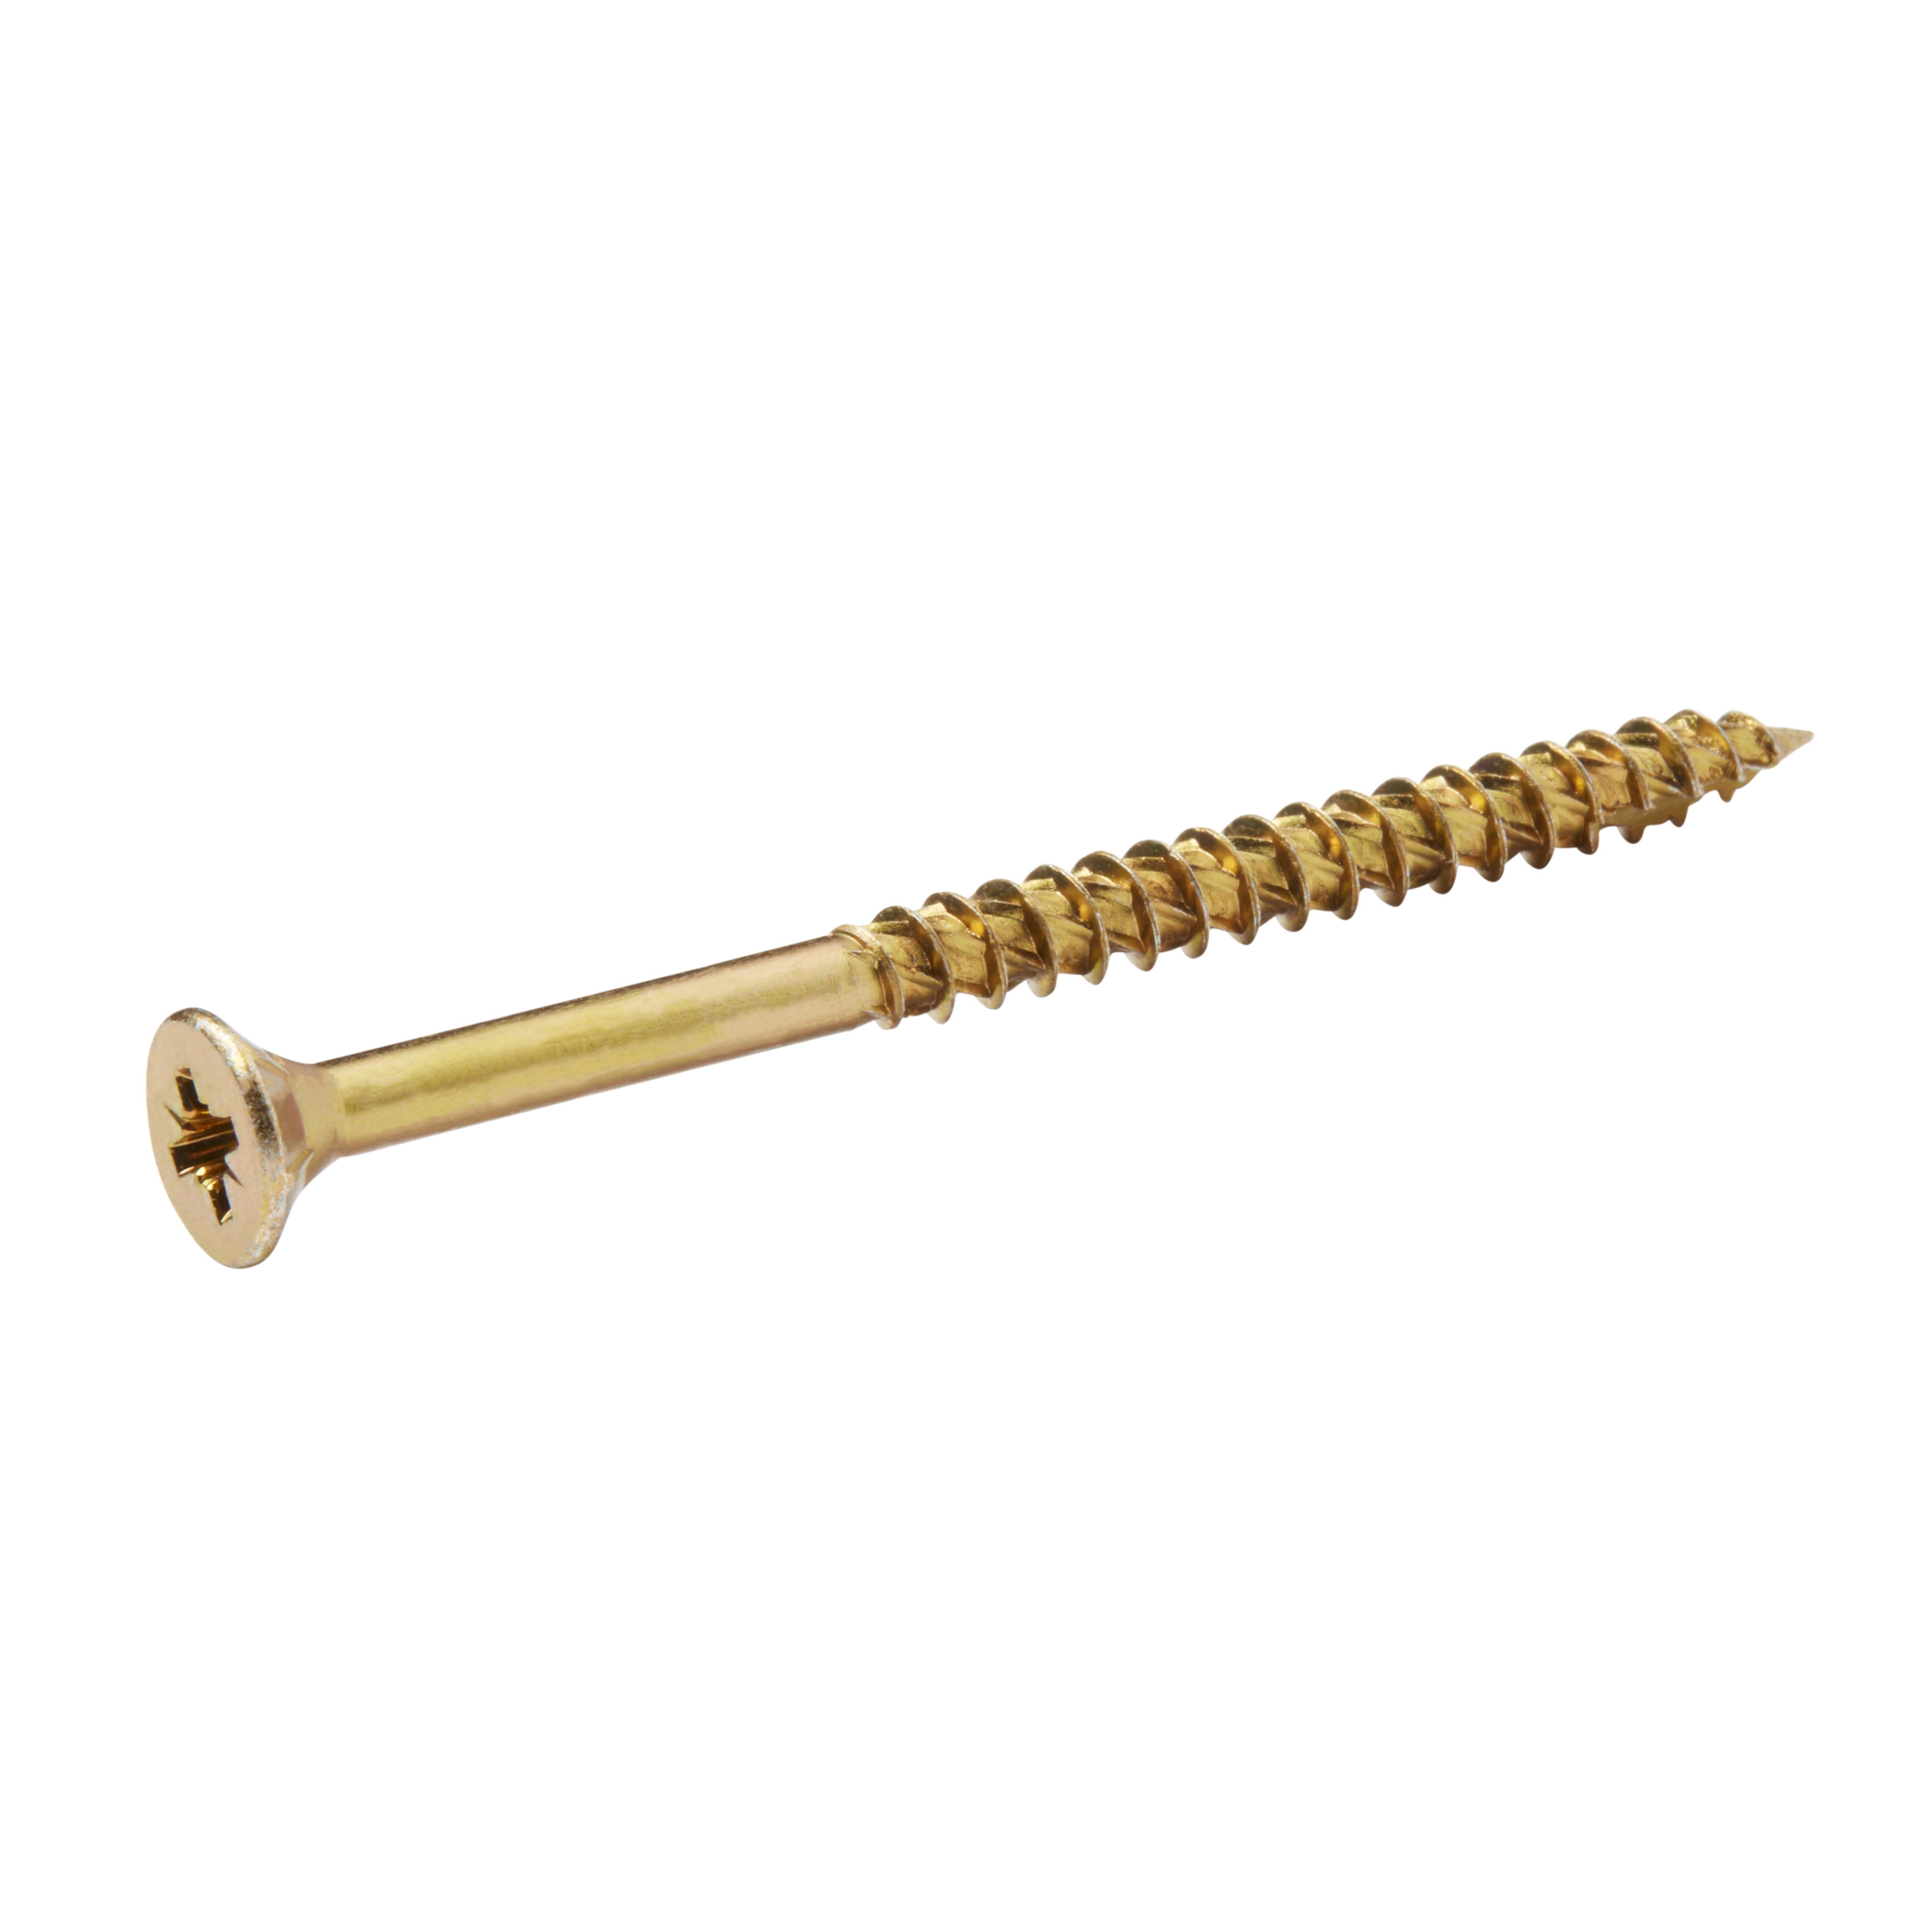 TurboDrive Assorted wood screw PZ Double-countersunk Yellow-passivated Carbon steel Wood screw, Pack of 600